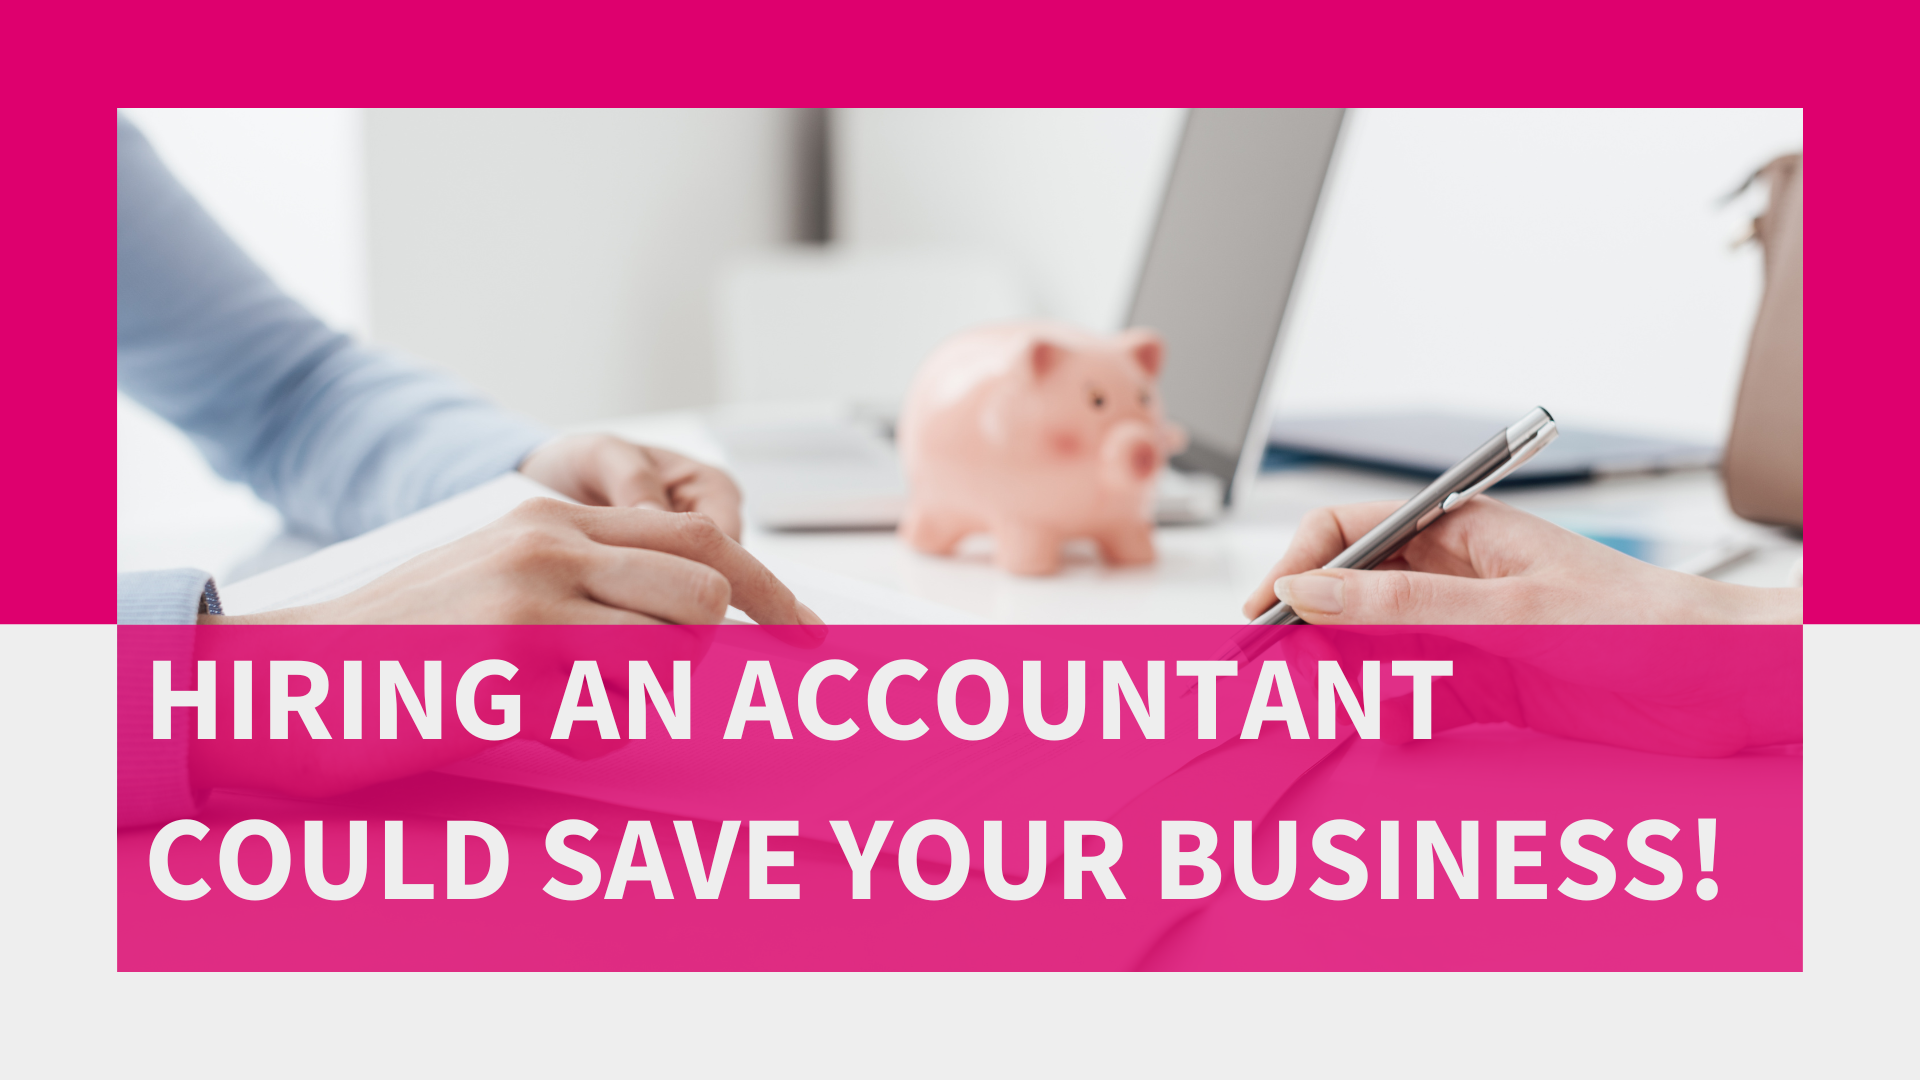 Hiring an accountant could save your business!